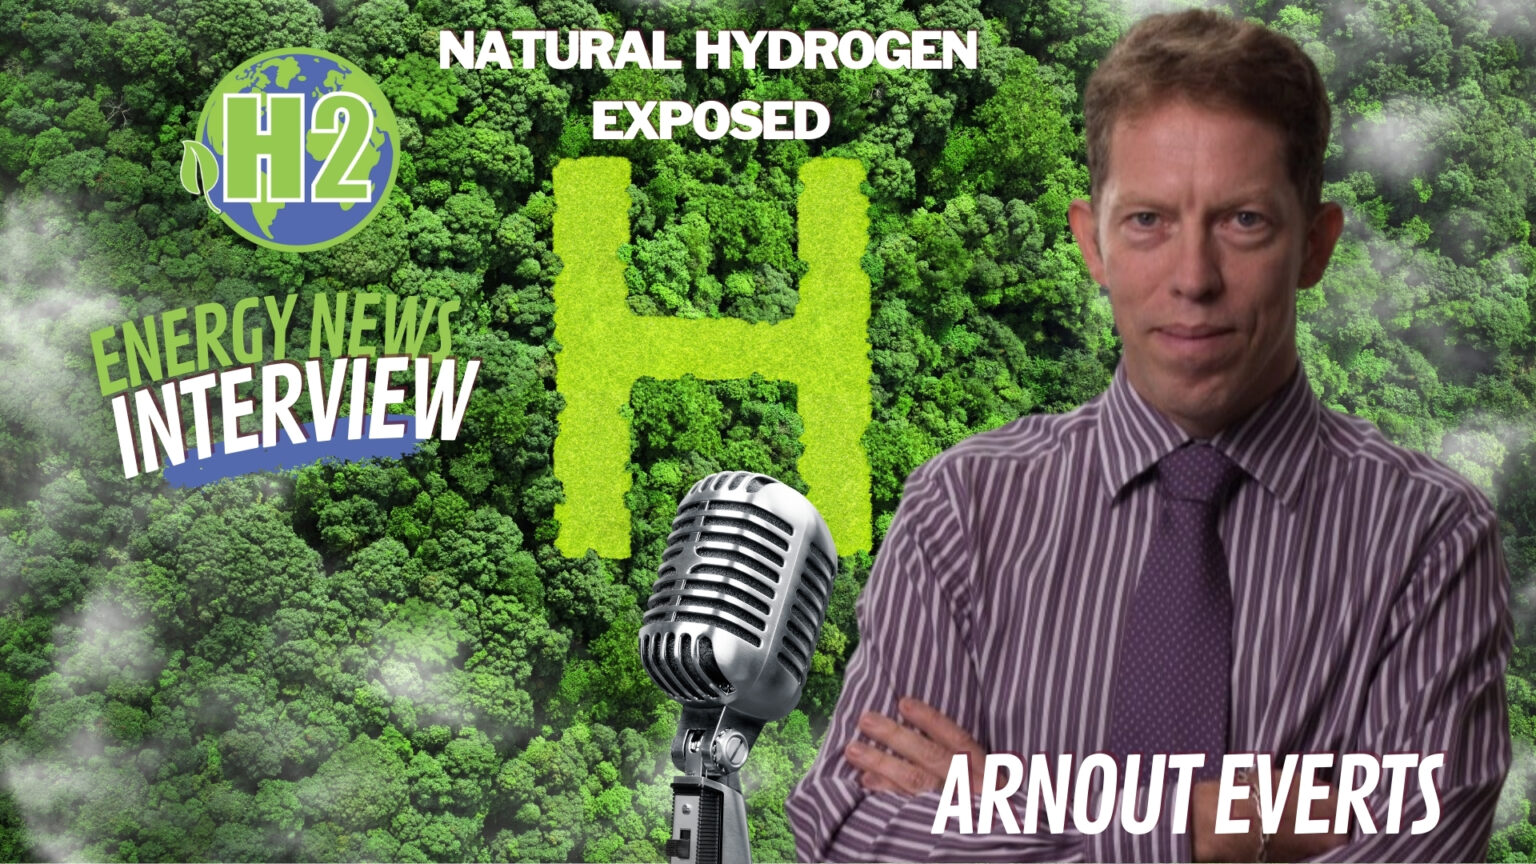 Natural Hydrogen Exposed! Interview with Geoscientist Arnout Everts